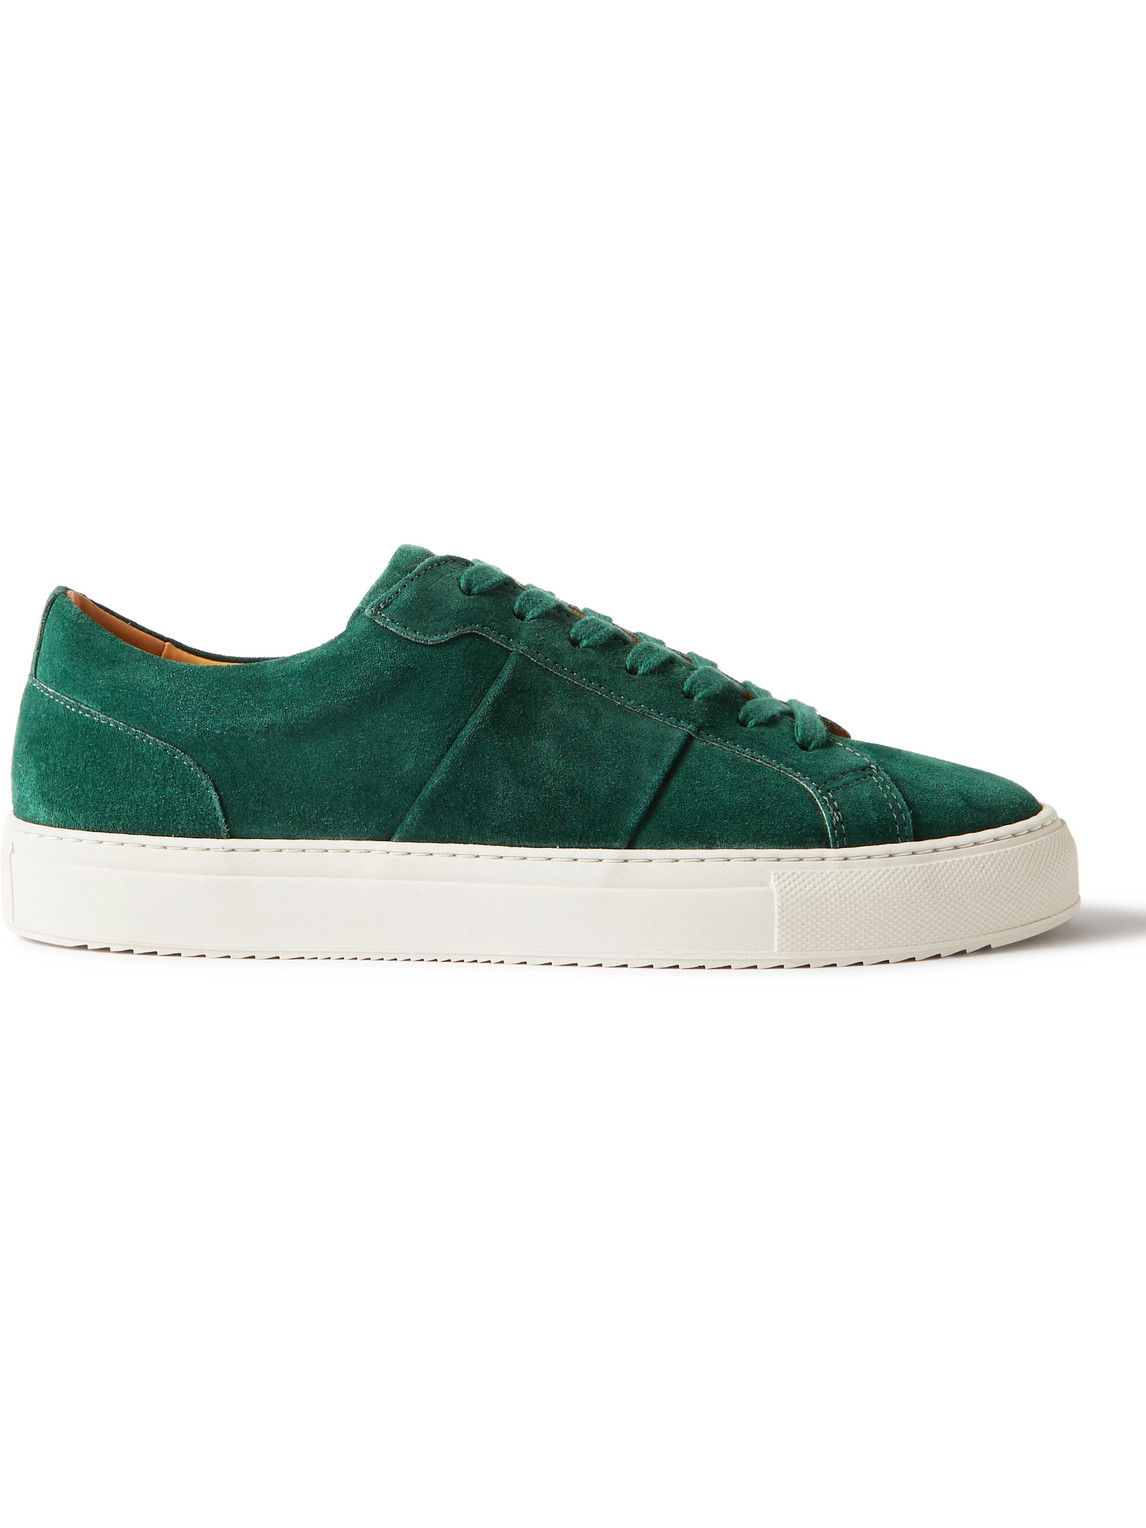 Alec Regenerated Suede by evolo® Sneakers